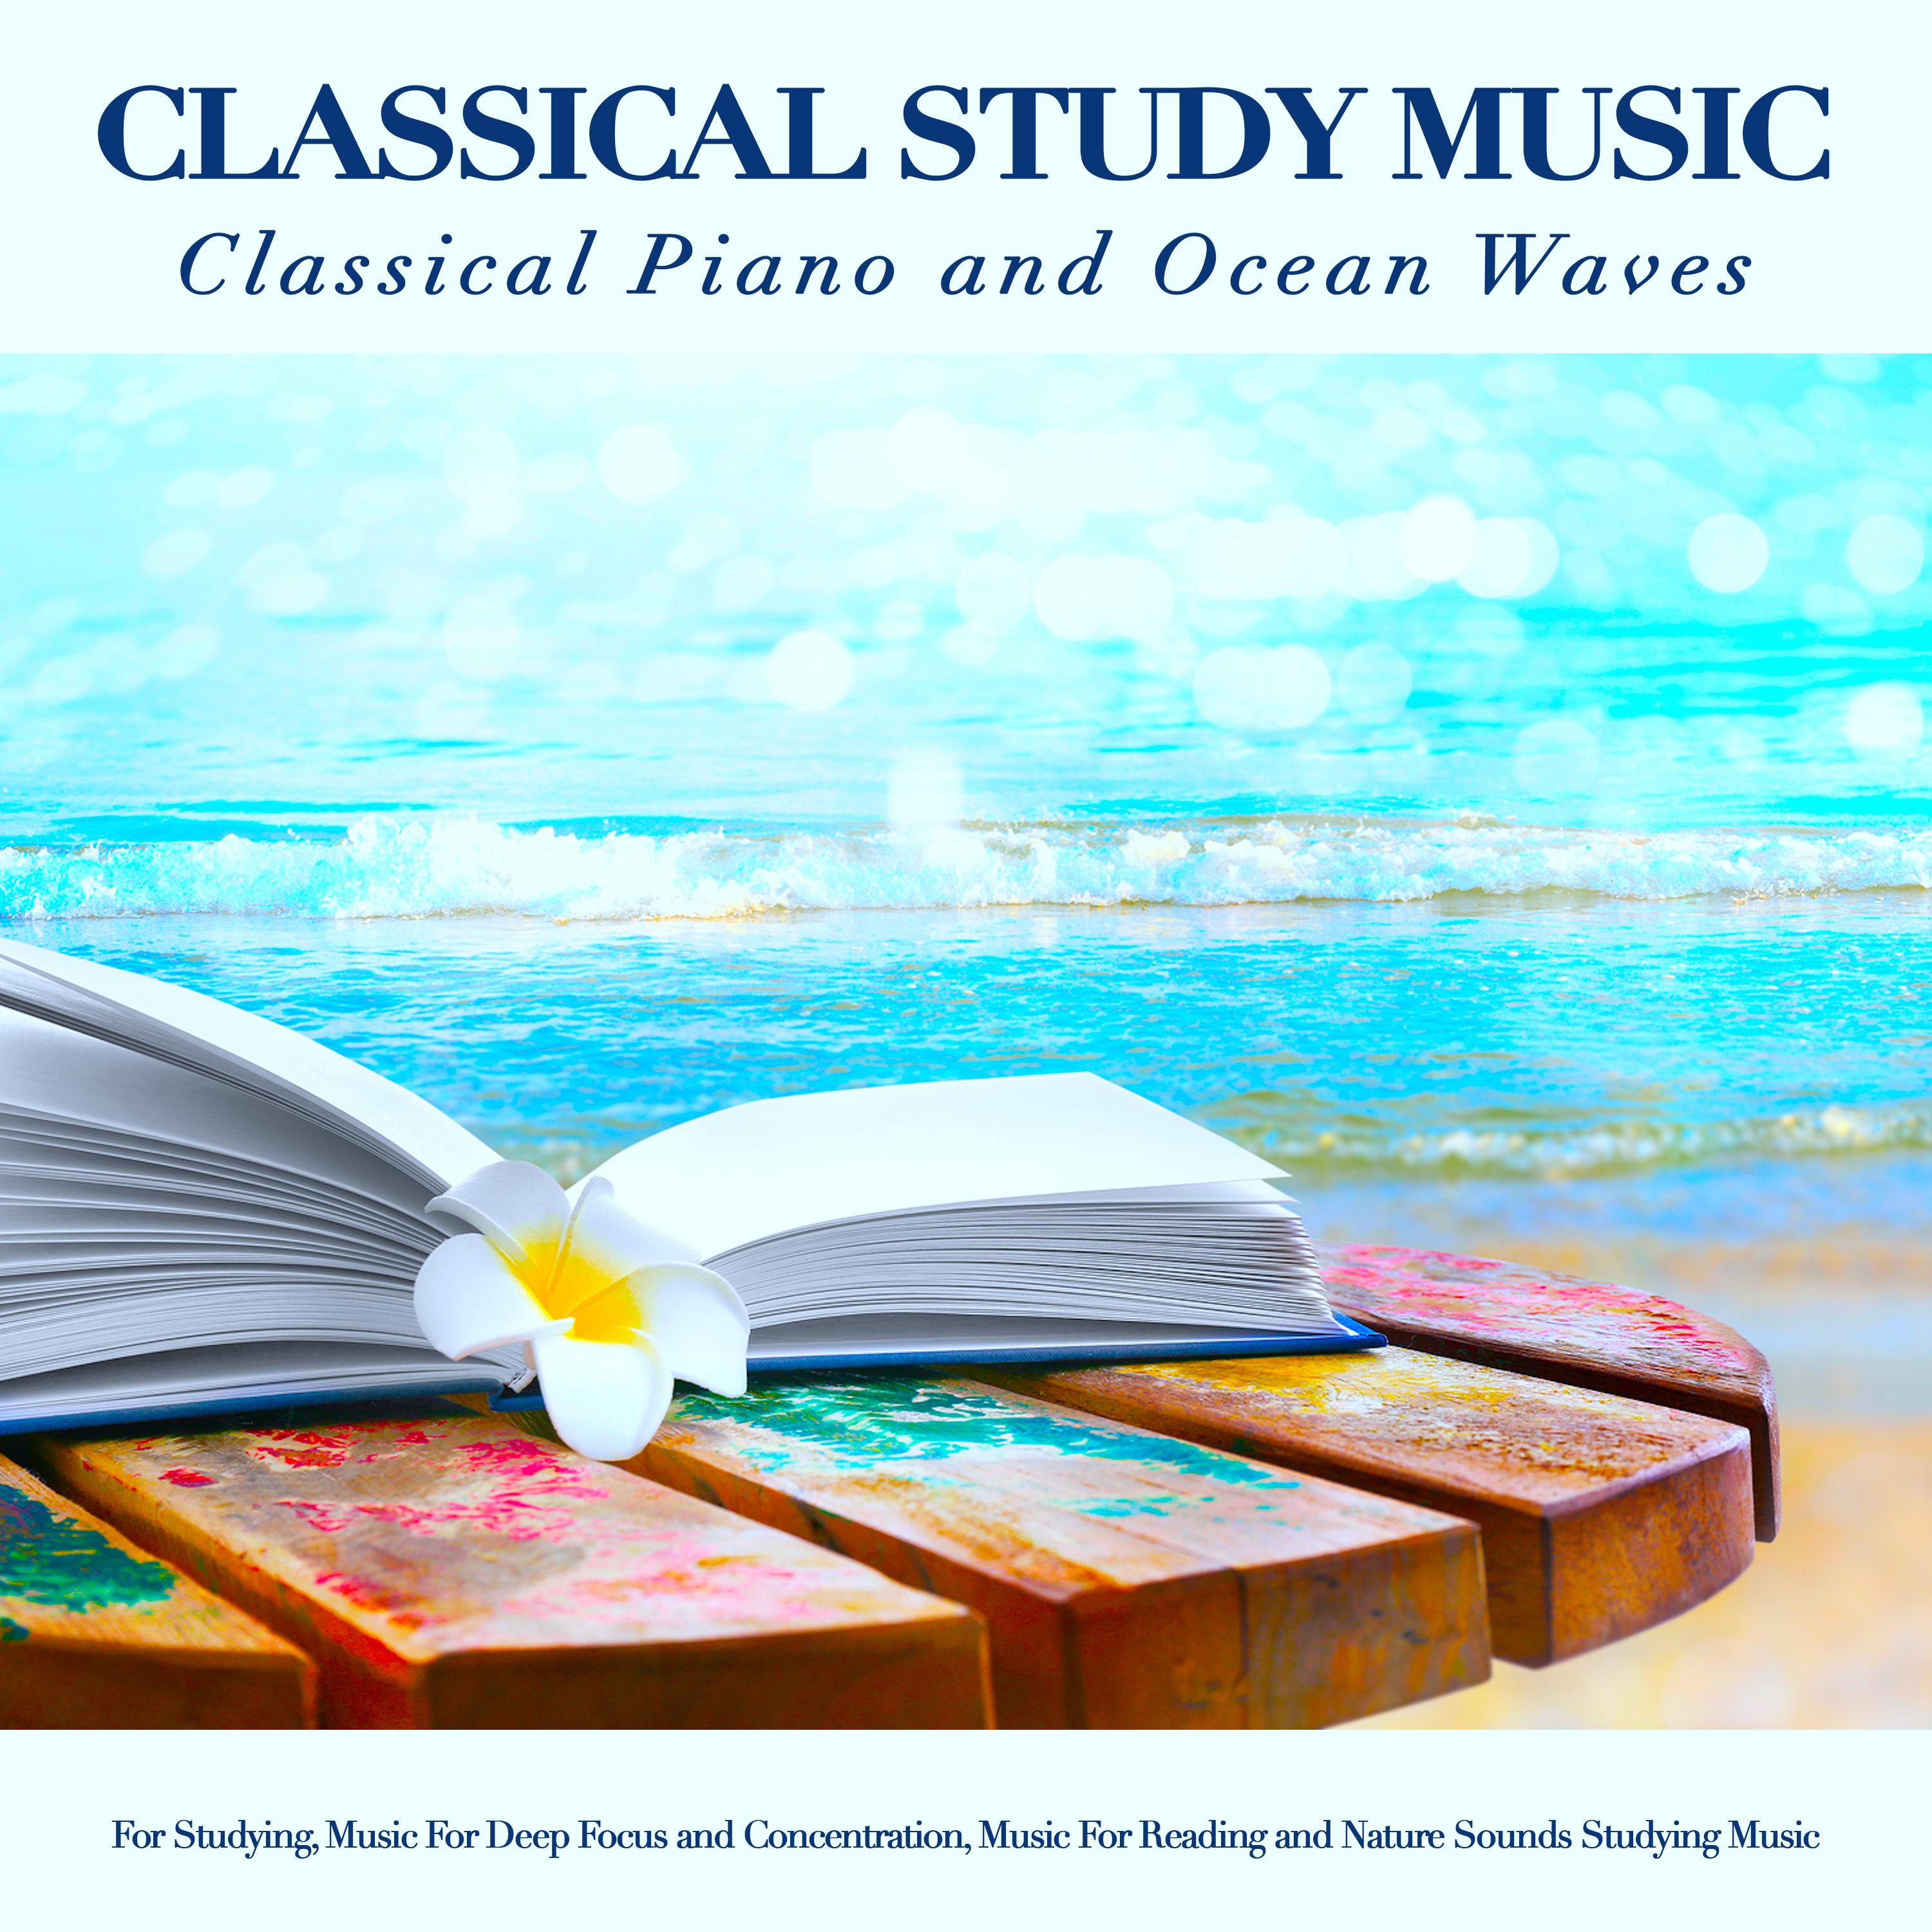 Mazurka - Chopin - Classical Study Music - Ocean Waves Sounds - Classical Piano for Studying